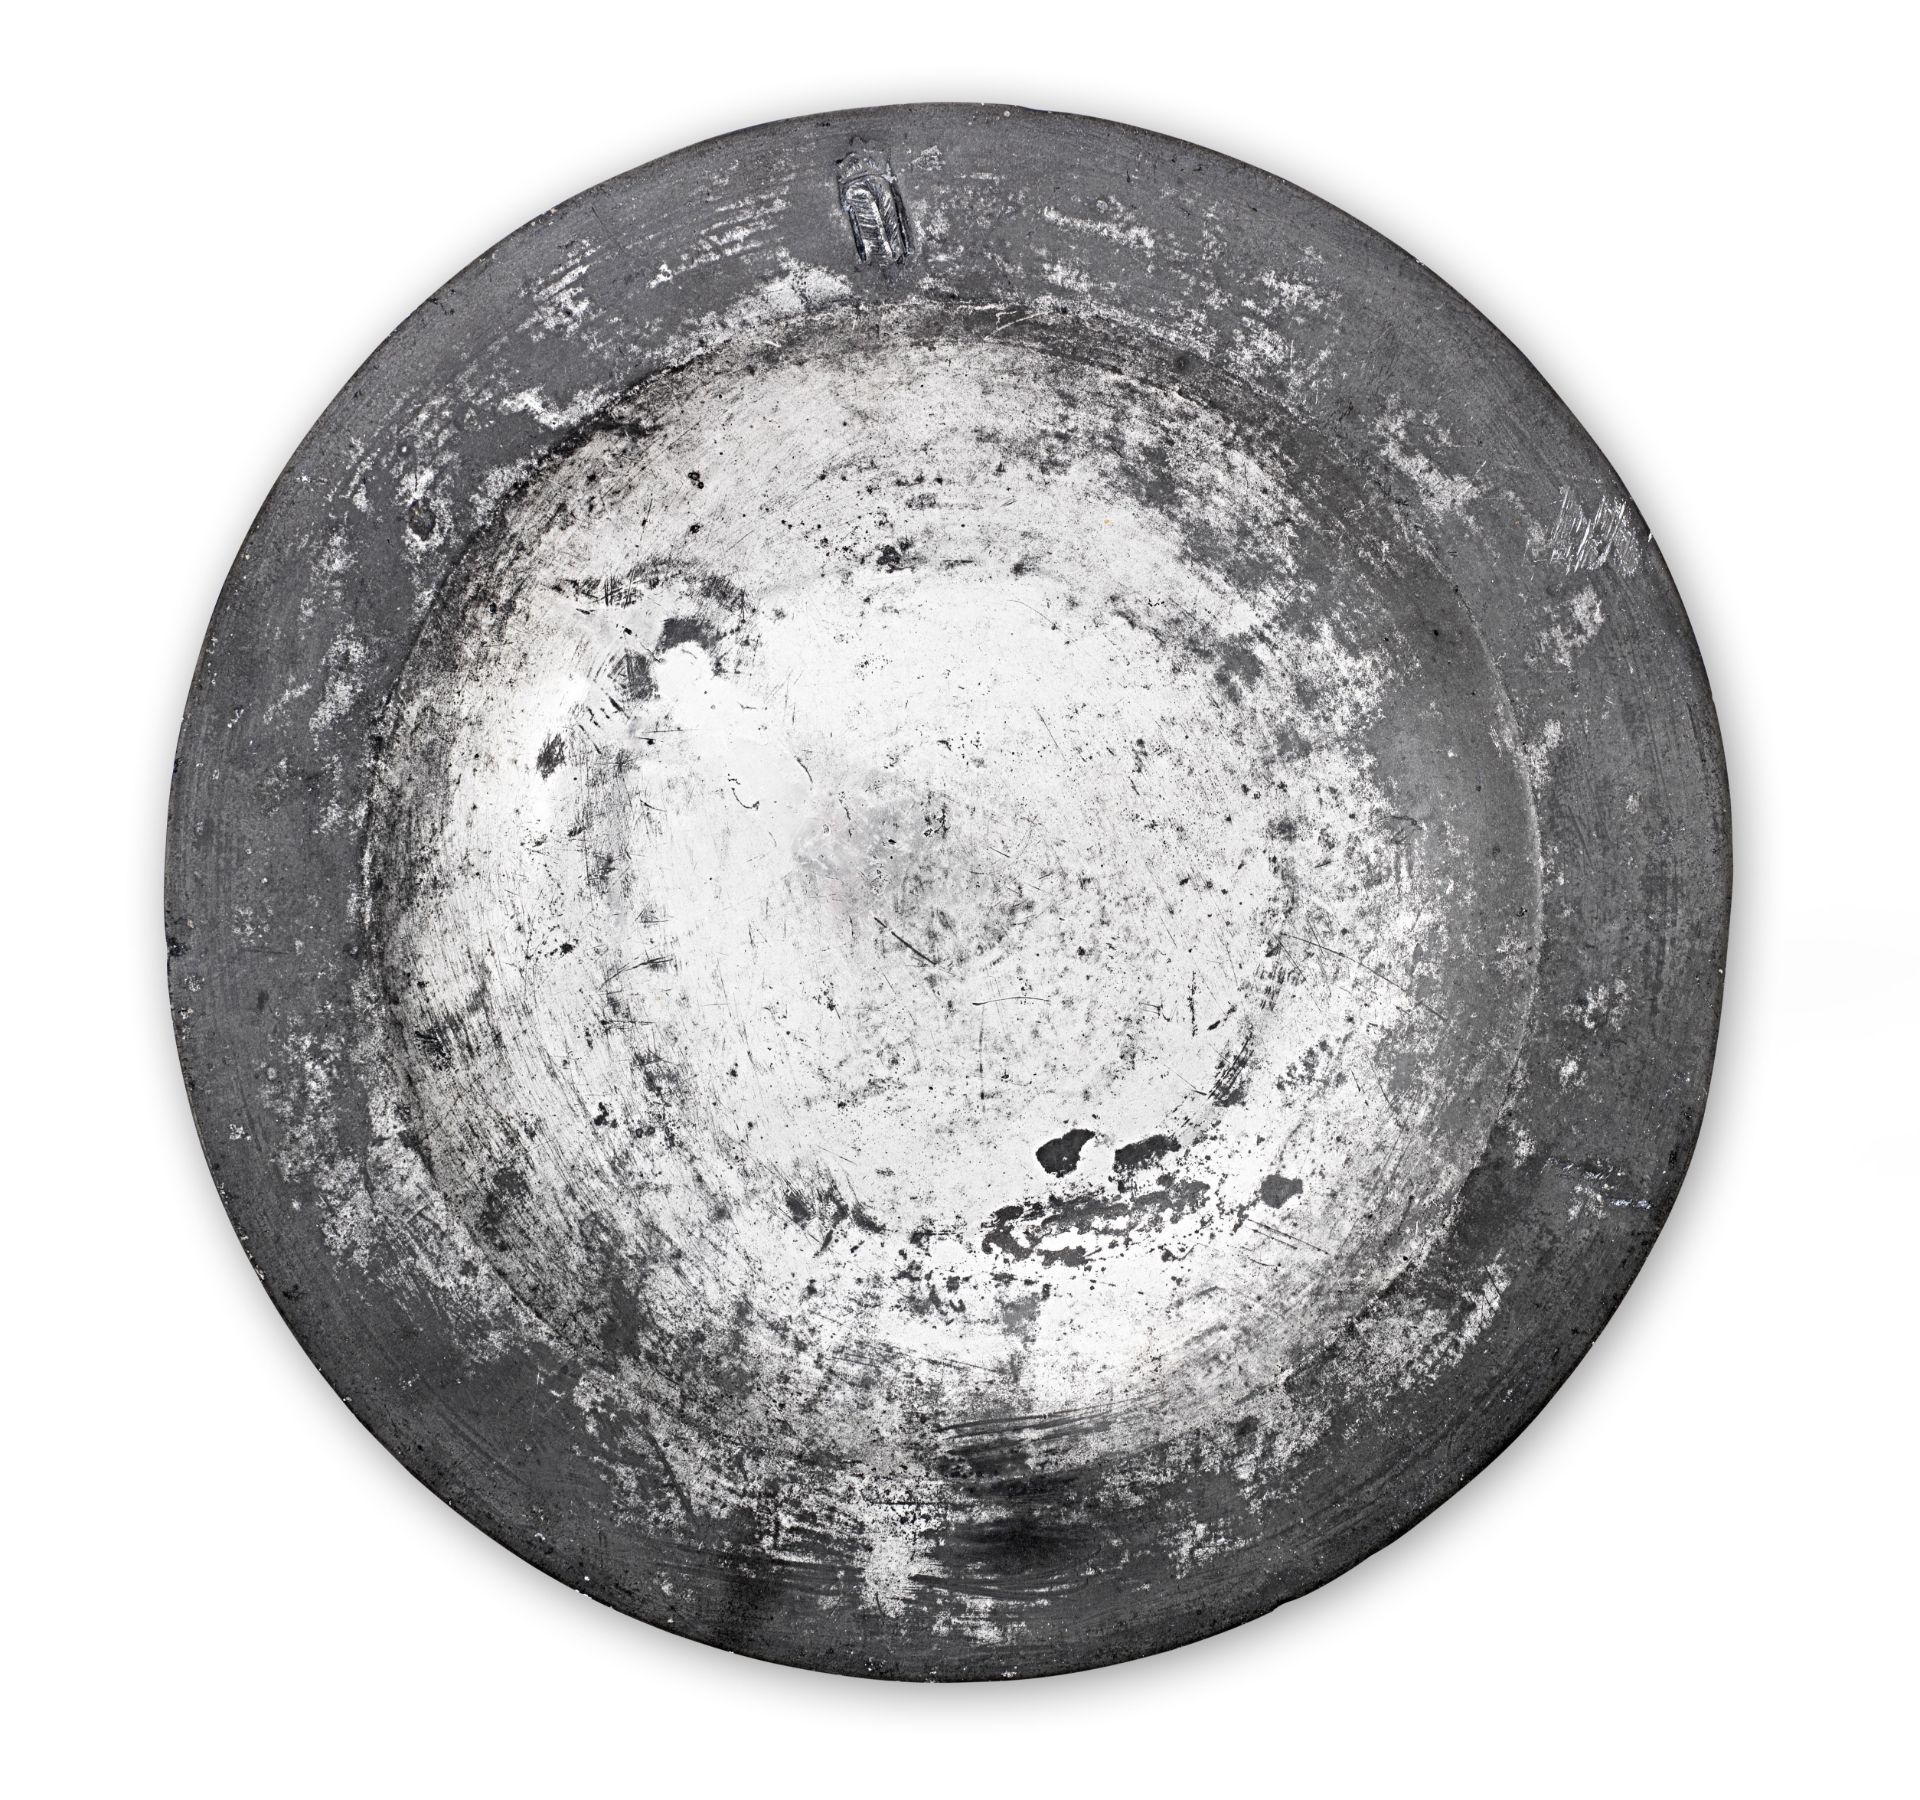 Of Royal Interest: A rare Henry VII pewter dish, circa 1500